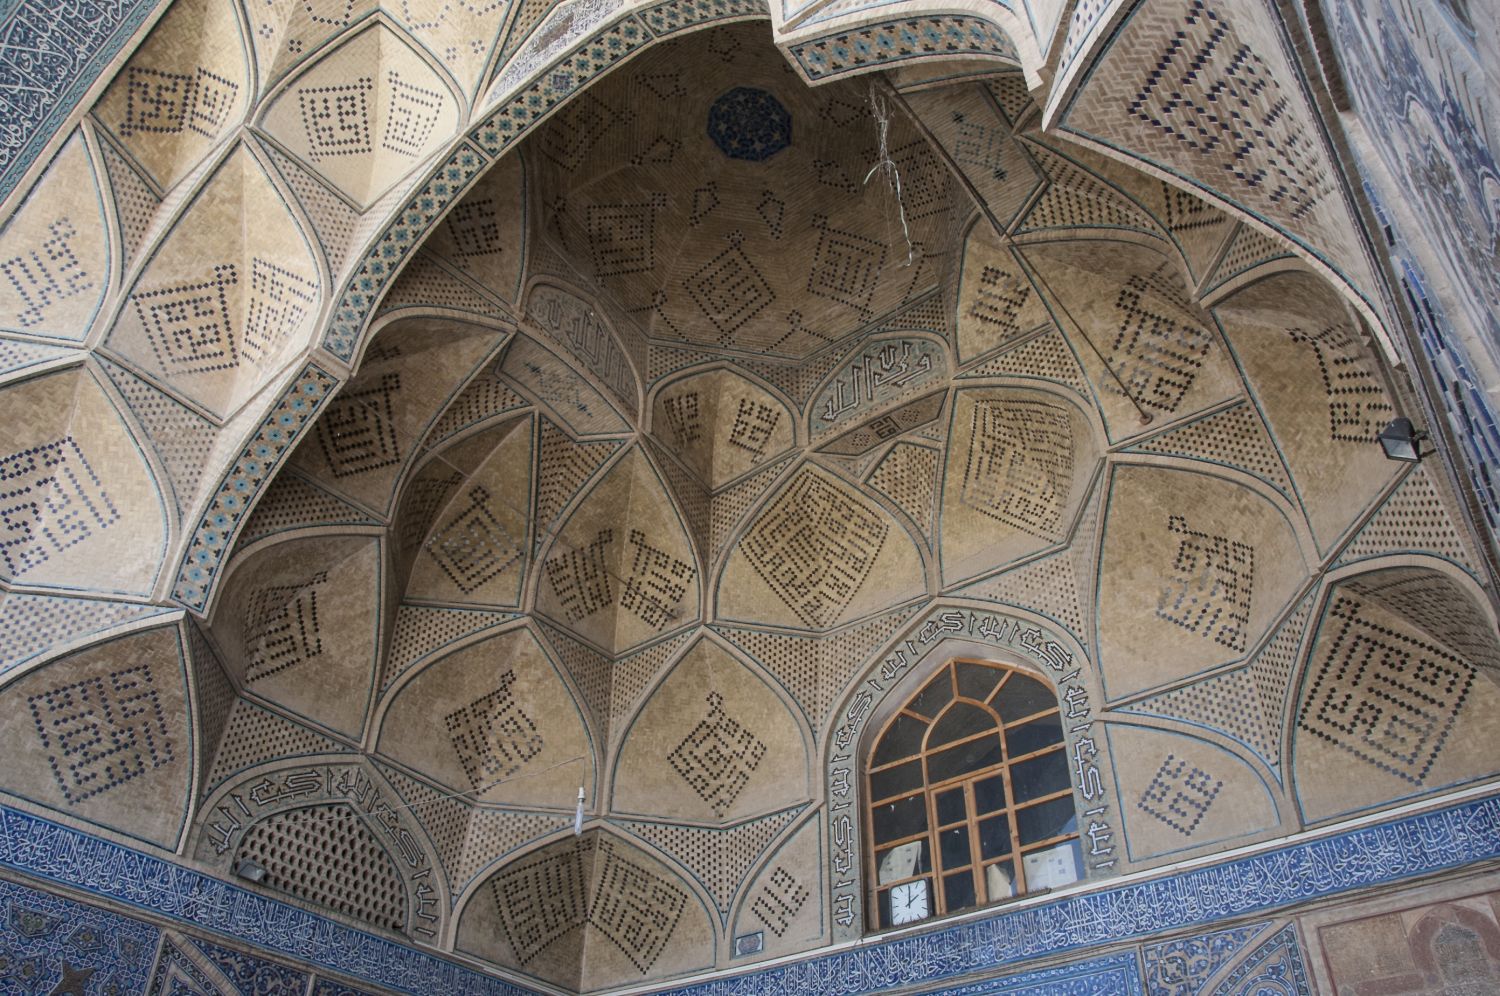 Southwest iwan, view up into muqarnas vault.